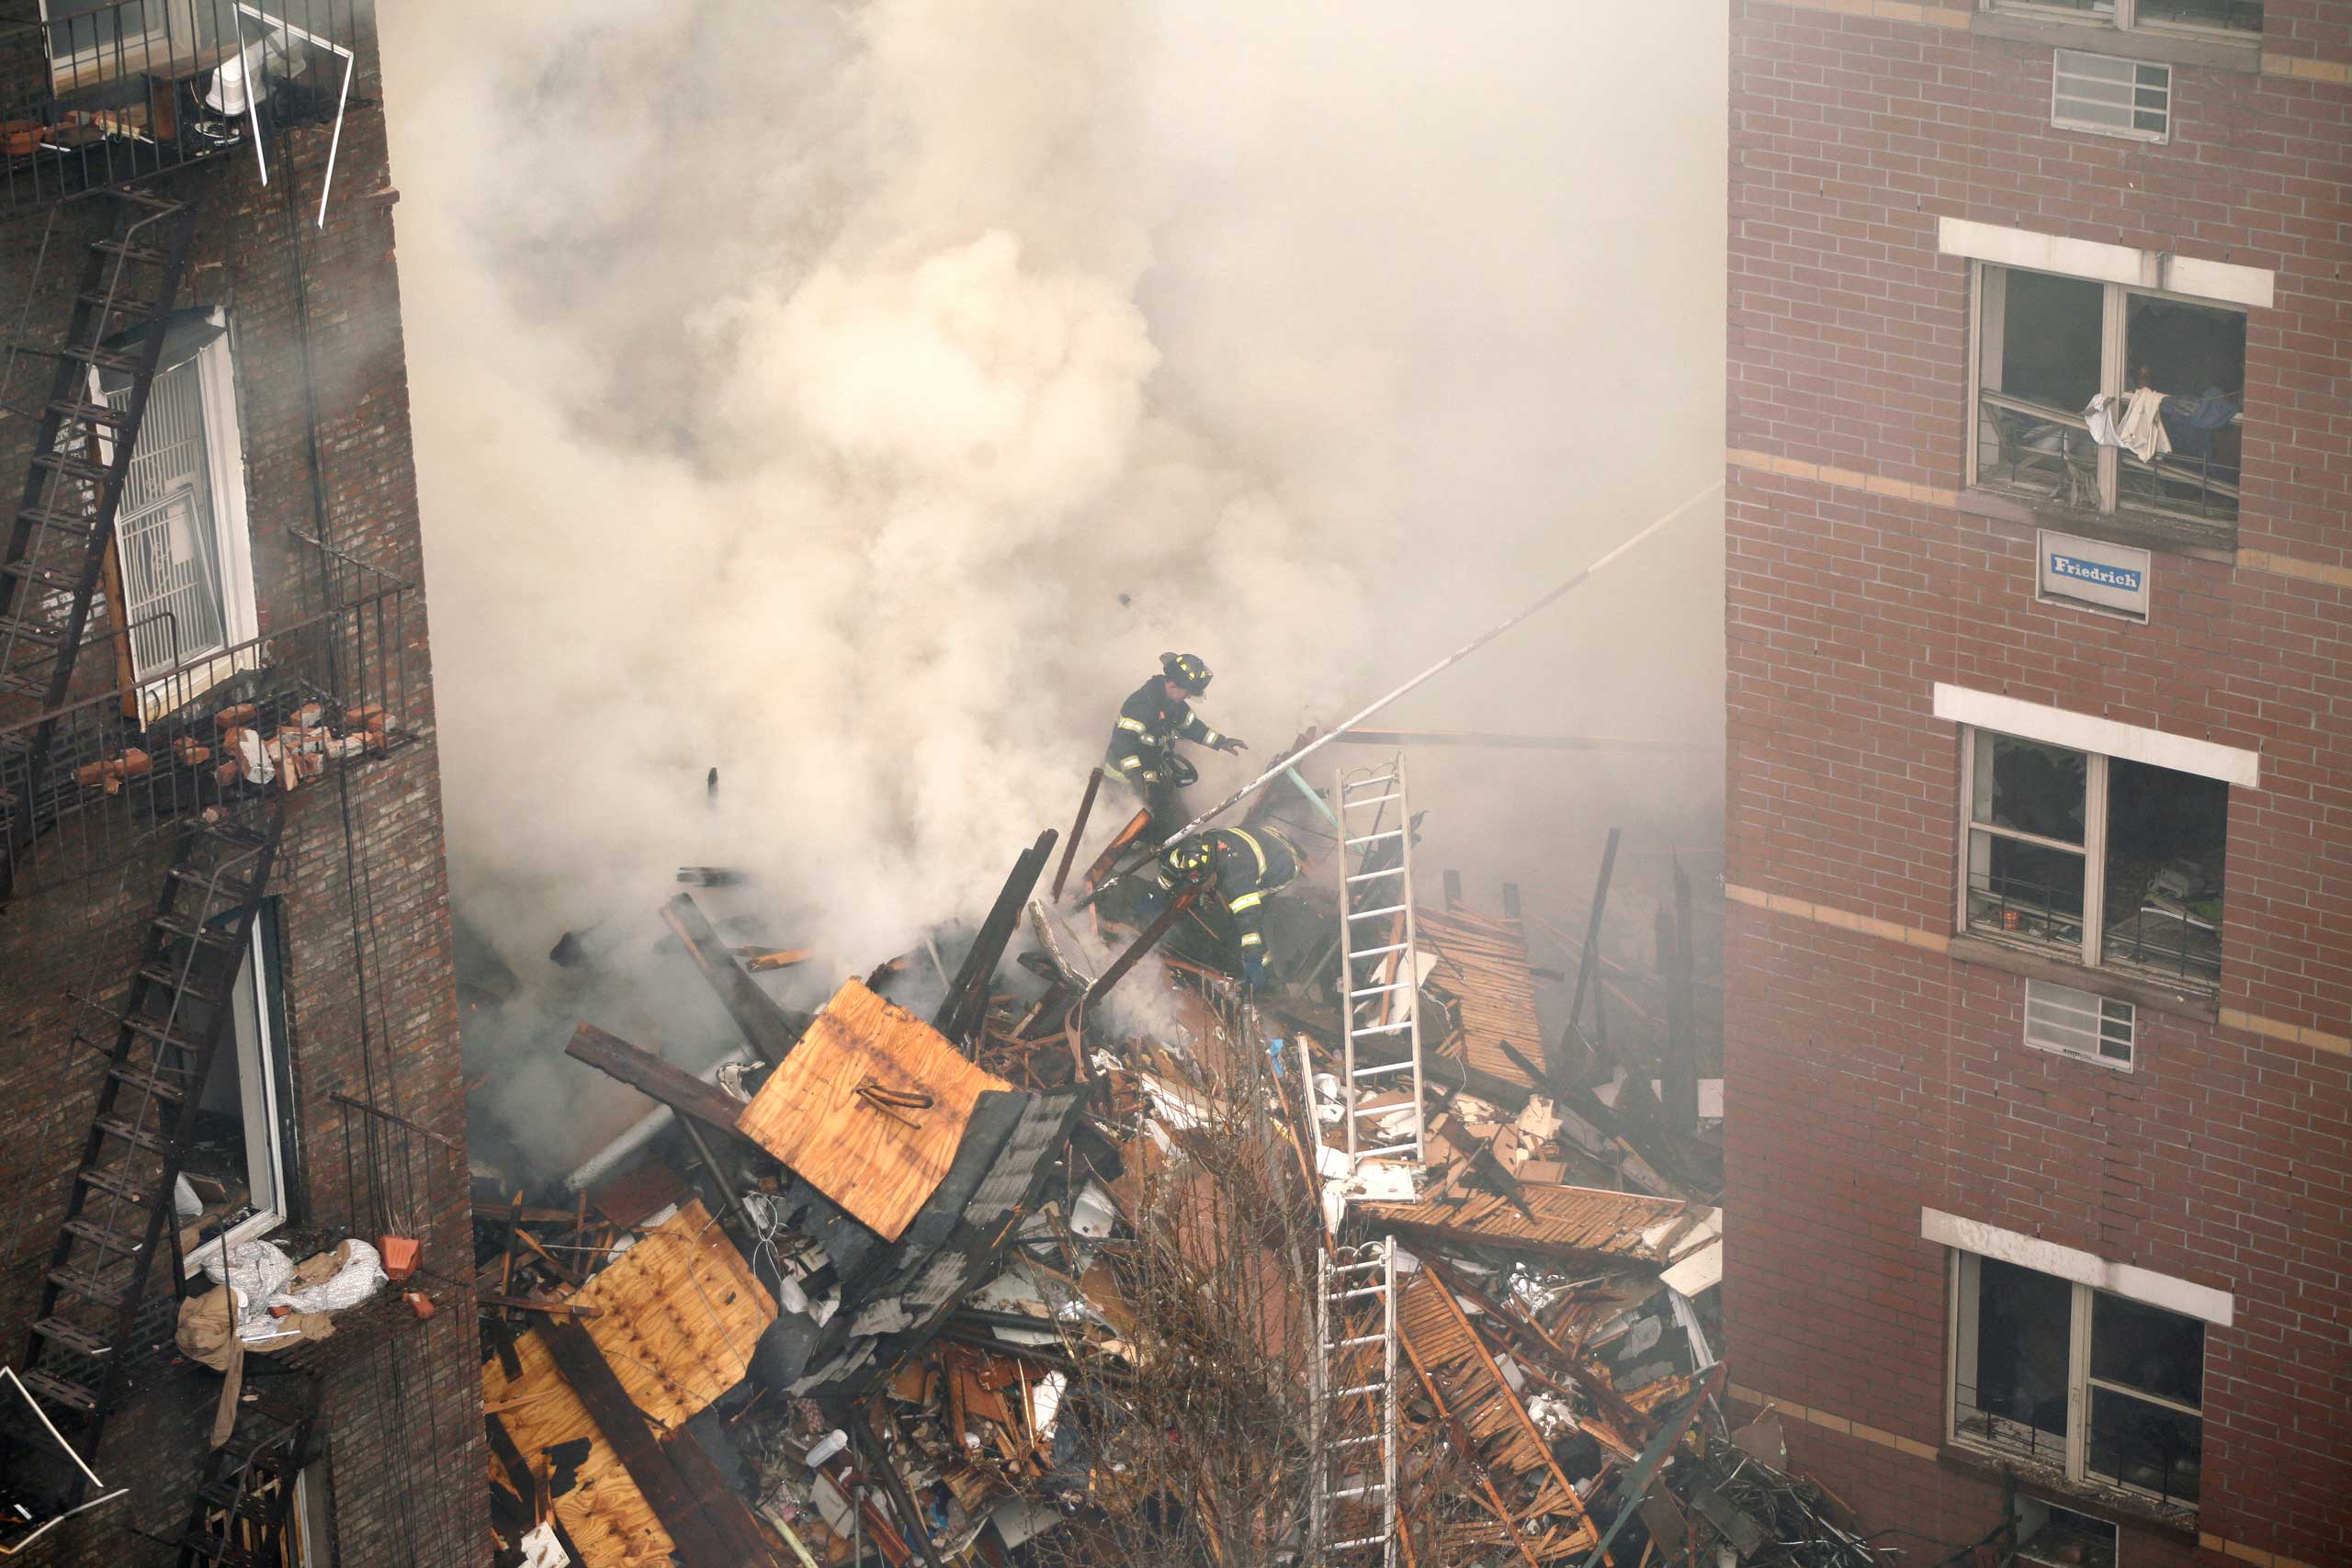 Firefighters scale a vast pile of debris that remained after a gas leak explosion destroyed two buildings on Park Avenue in the East Harlem neighborhood of New York, March 12, 2014.